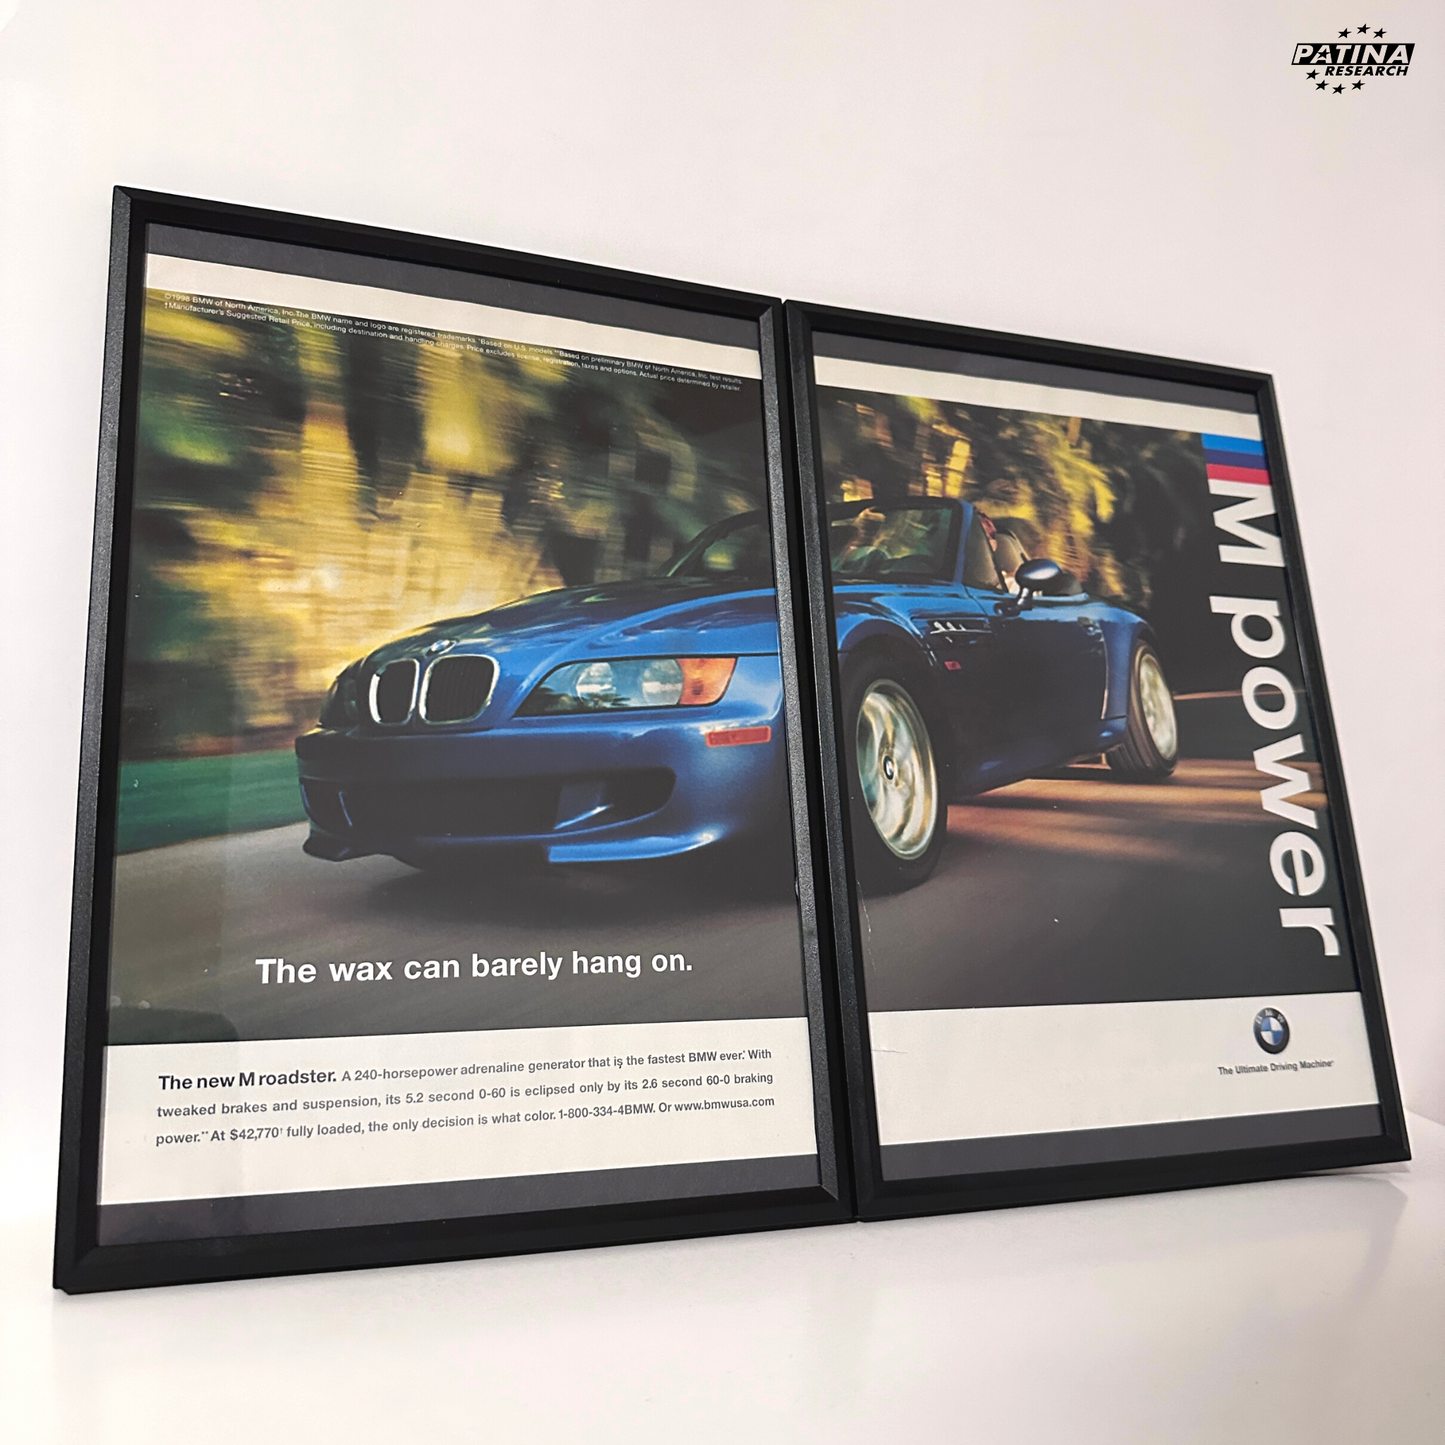 Bmw z3m wax can barely hang on framed ad